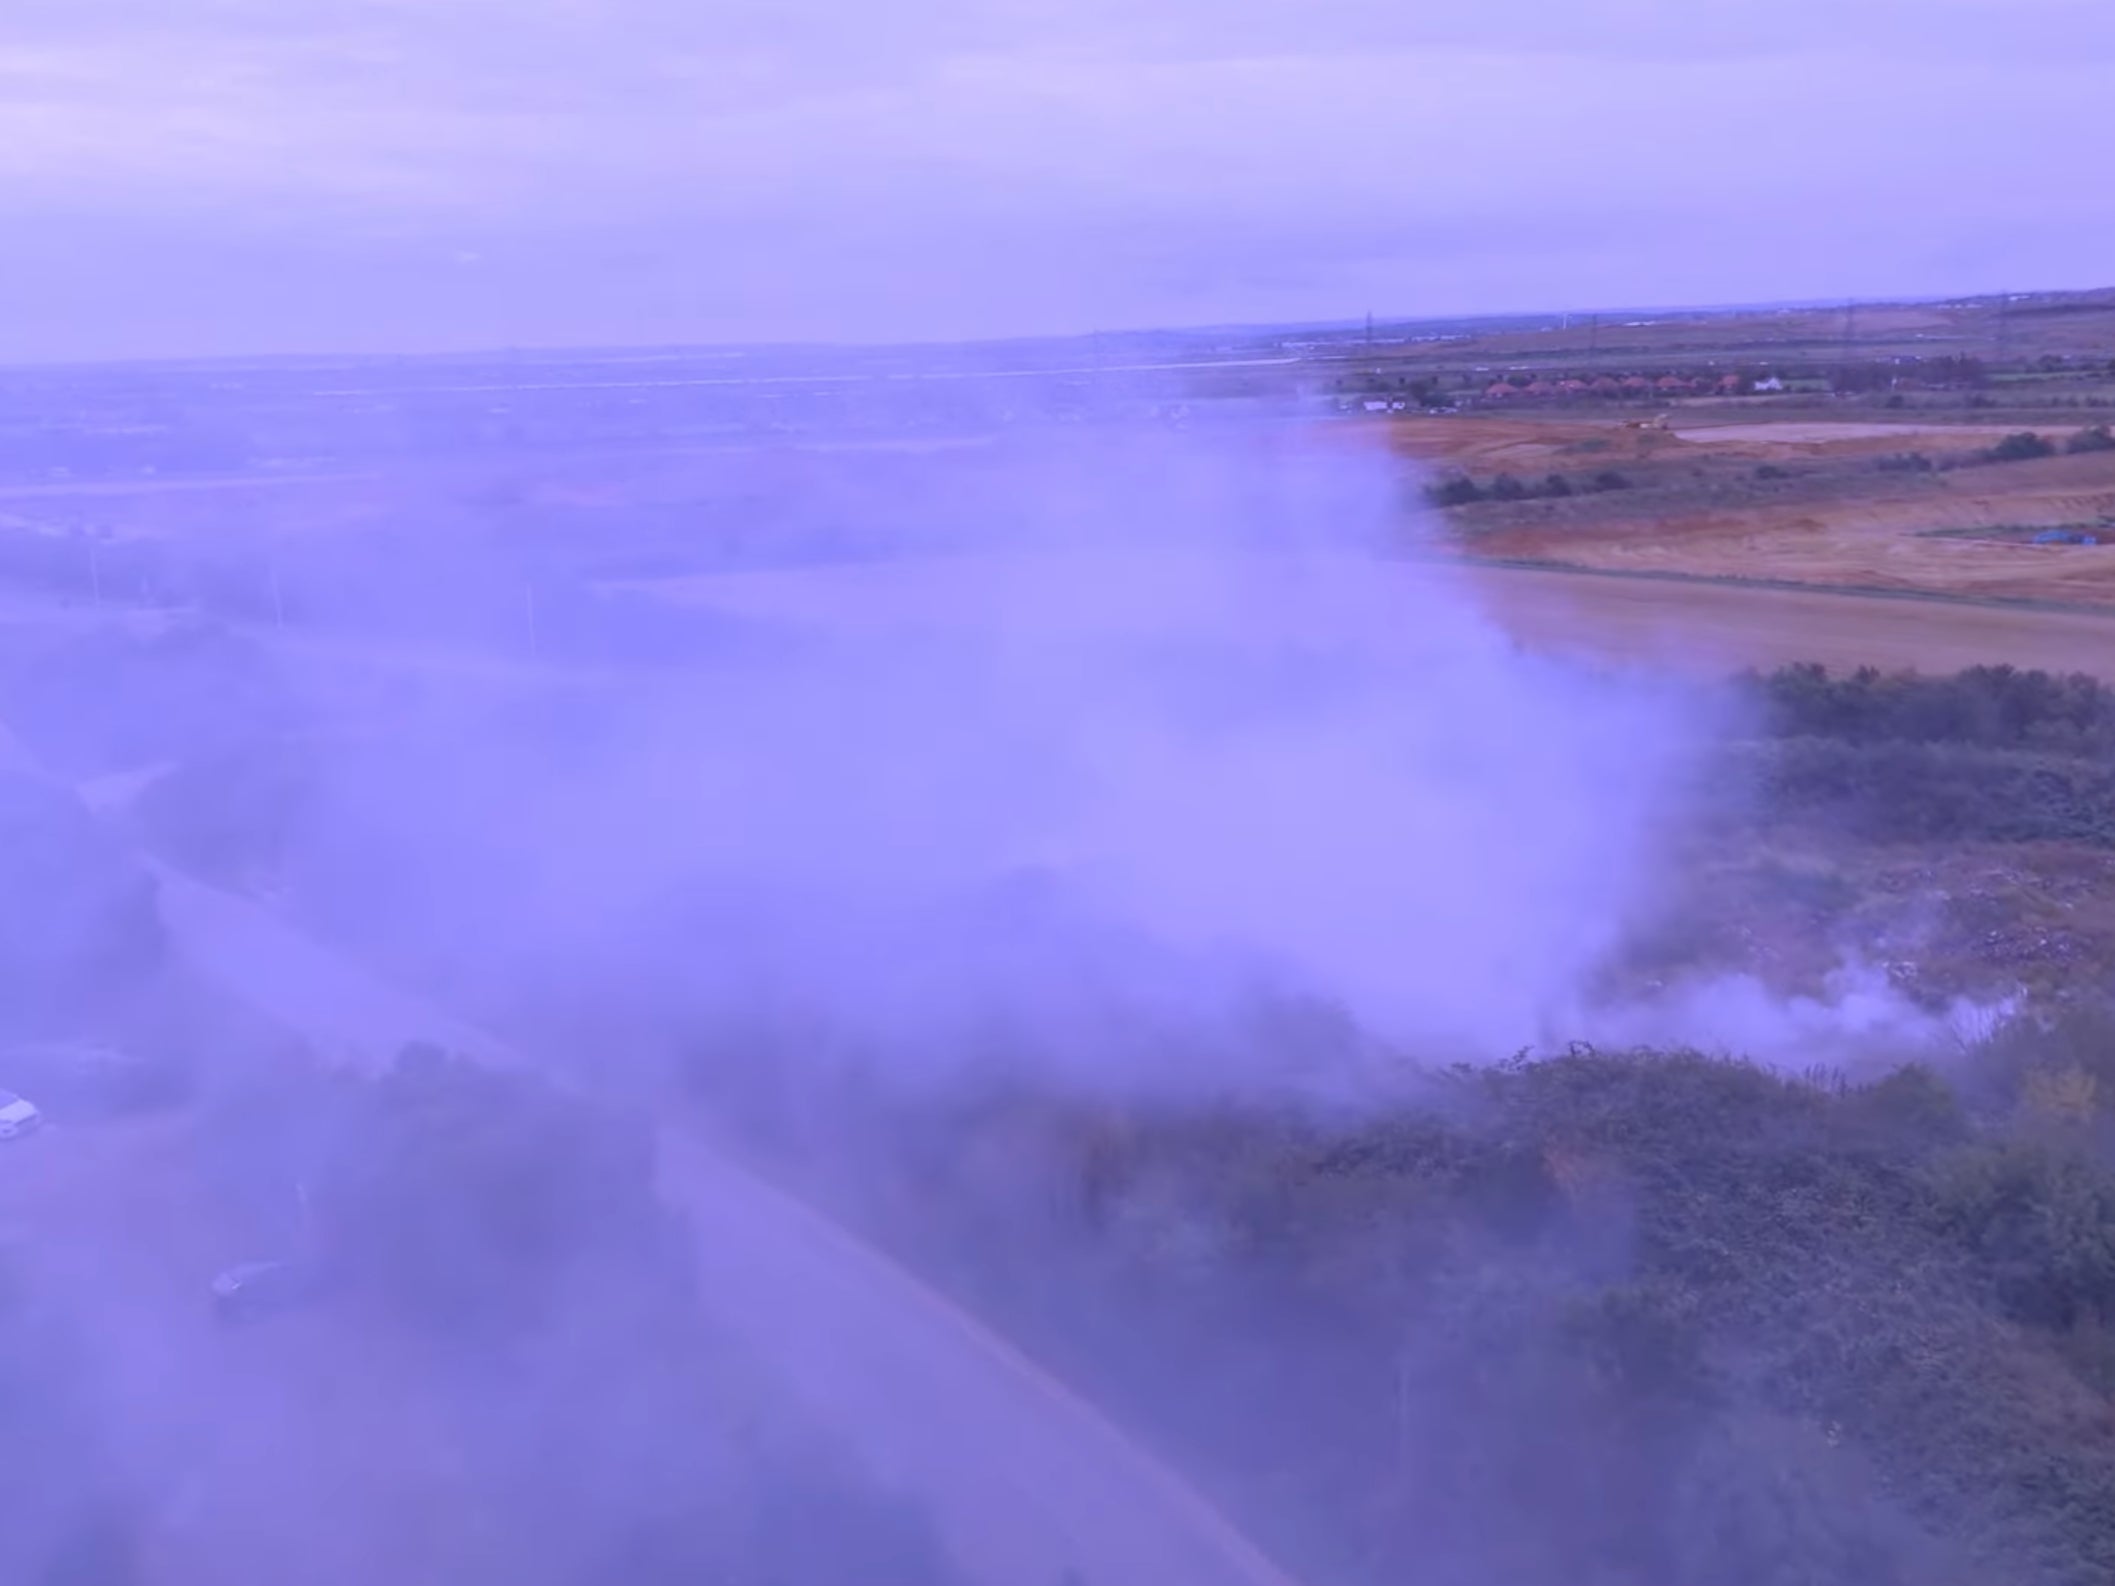 Smoke pours out of the underground fire on the site which has been used as an illegal dump for decades